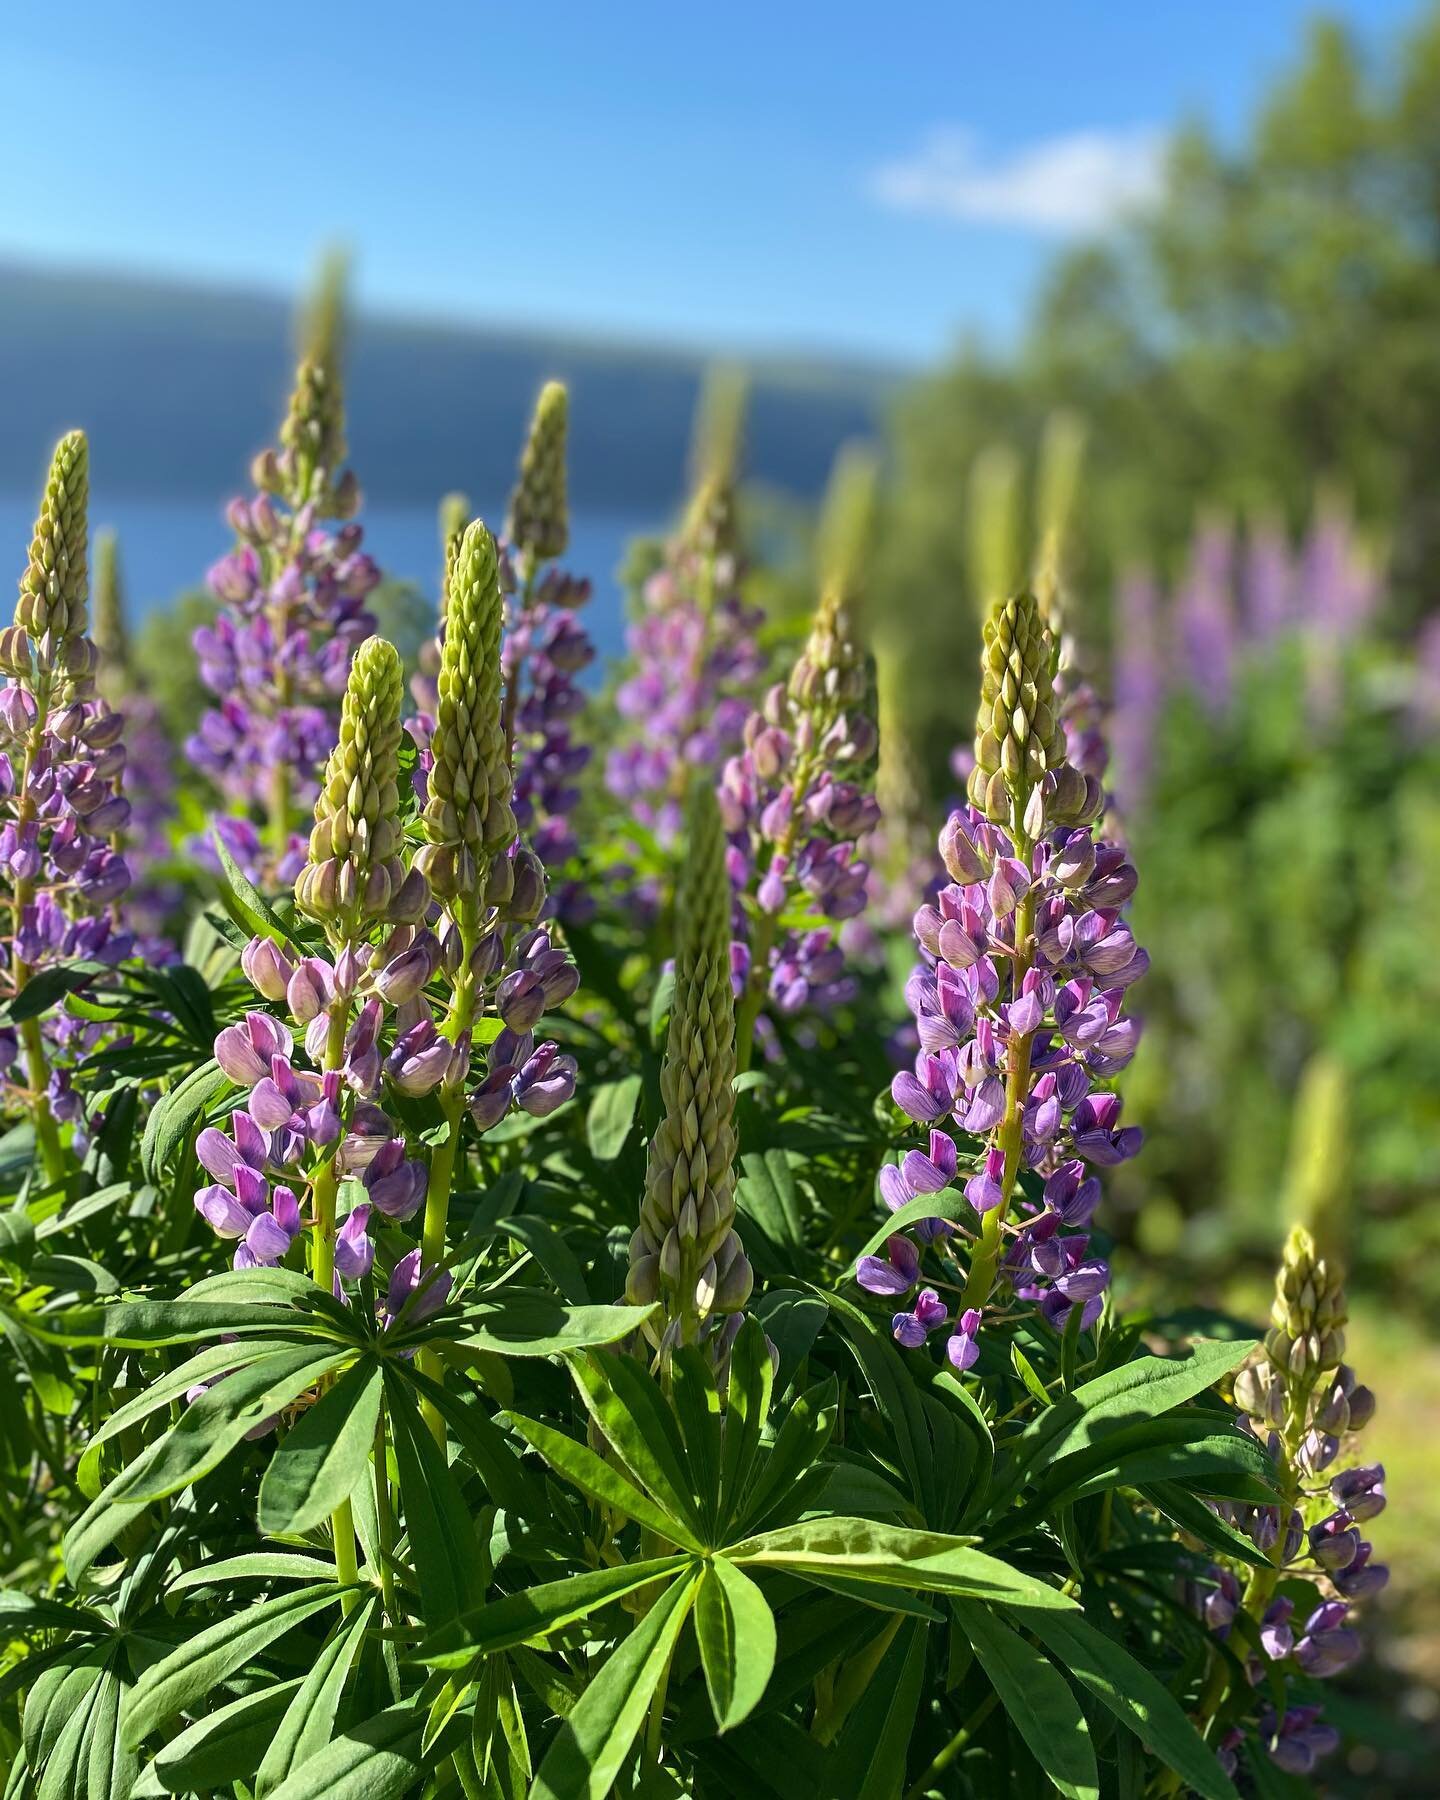 Lupins on Loch Ness. From the garden here at Foyers Lodge.

A special pic for @palebackwriter